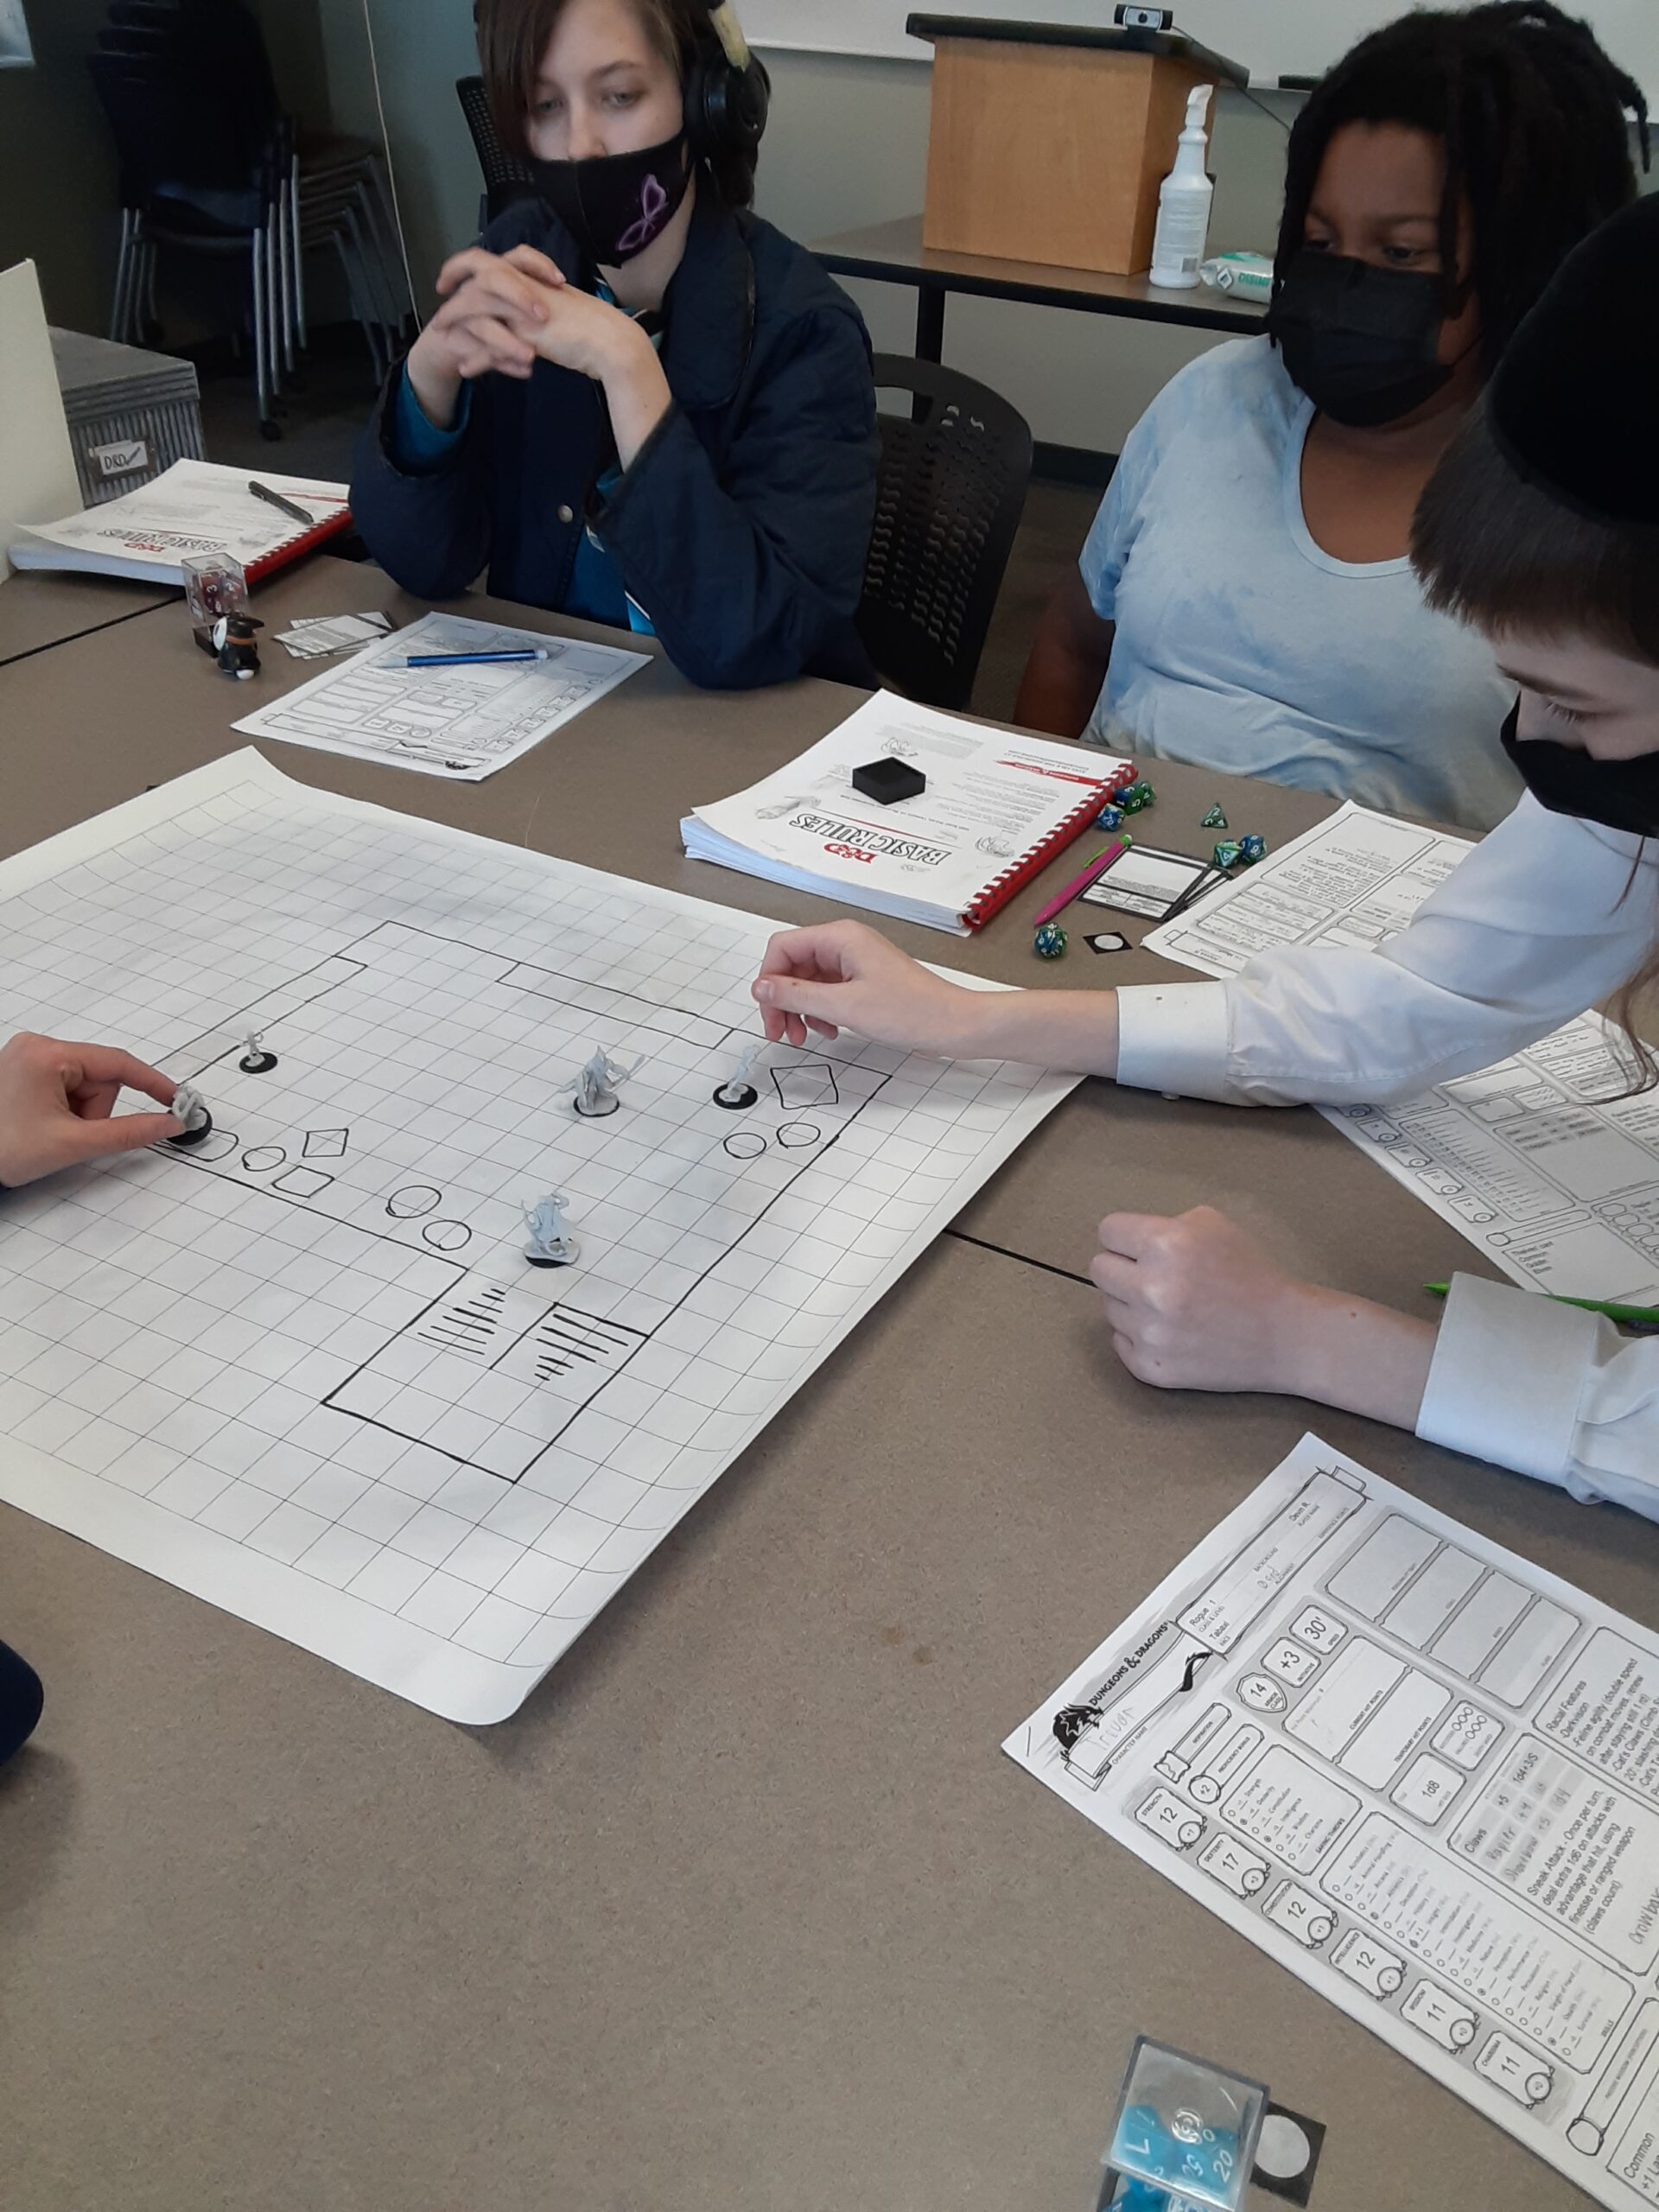 Kids participate in Dungeons and Dragons game at a session.